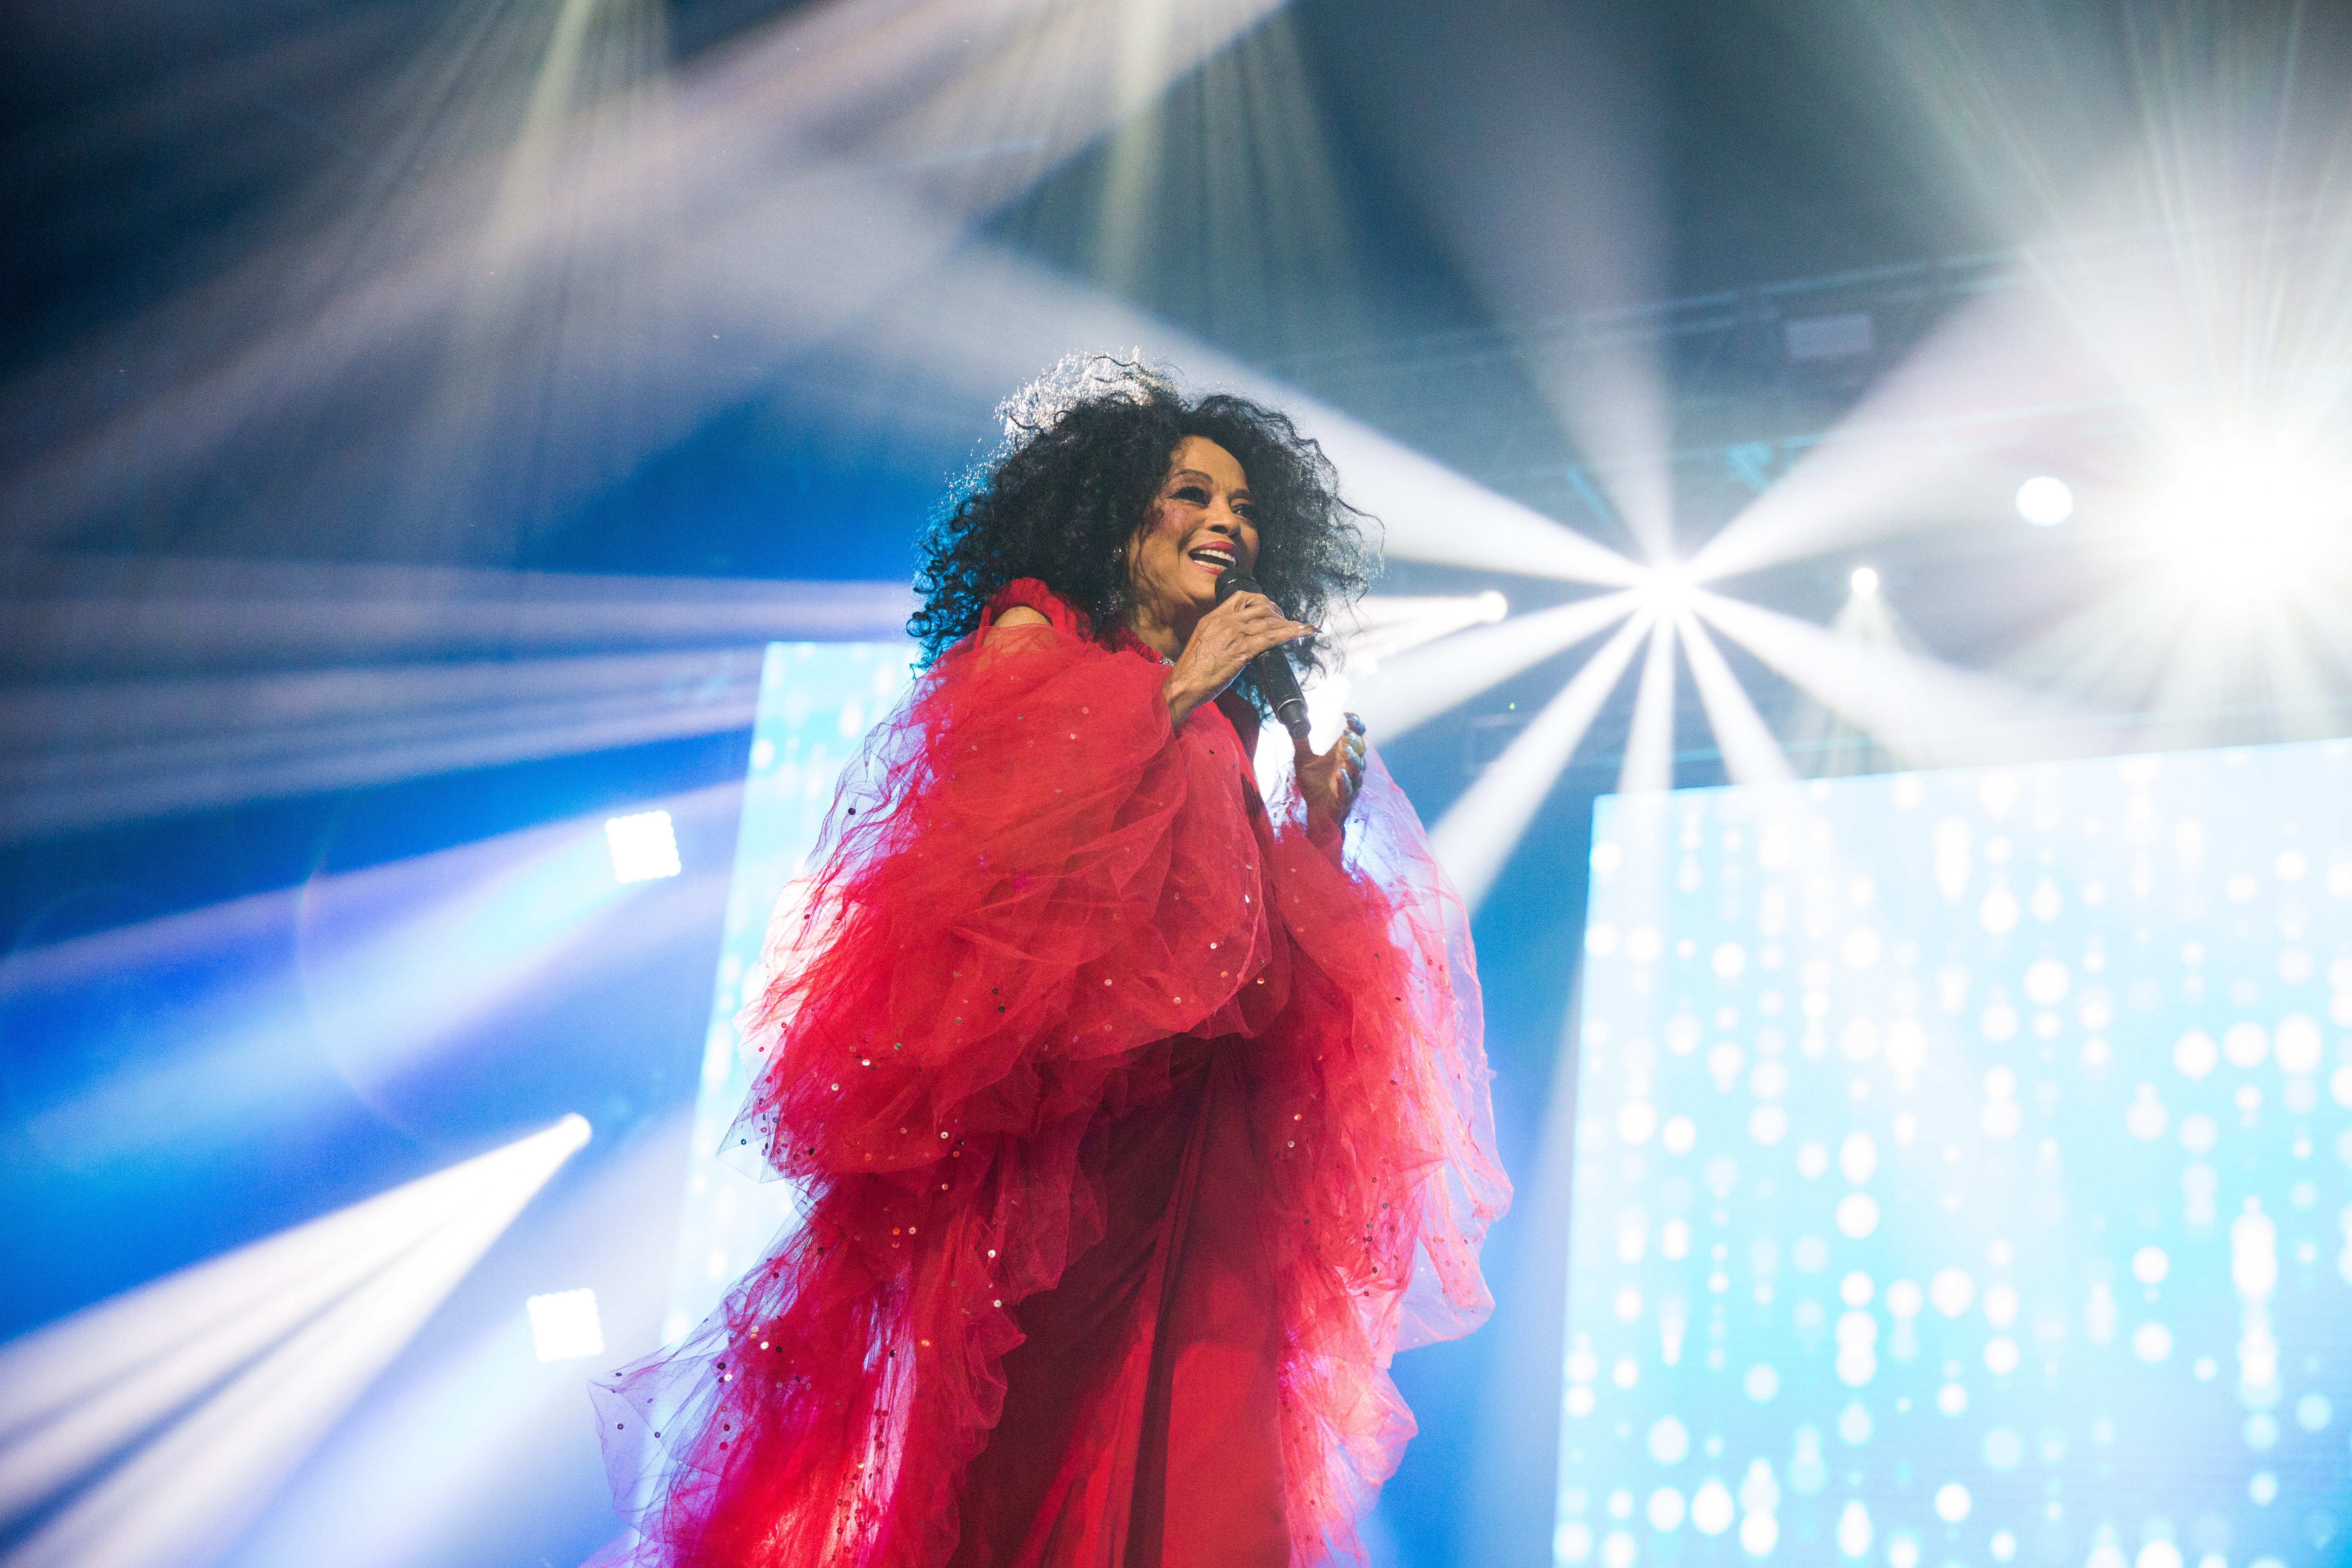 When Diana Ross walked into Nick Tahou's, the joint went wild, a witness says.